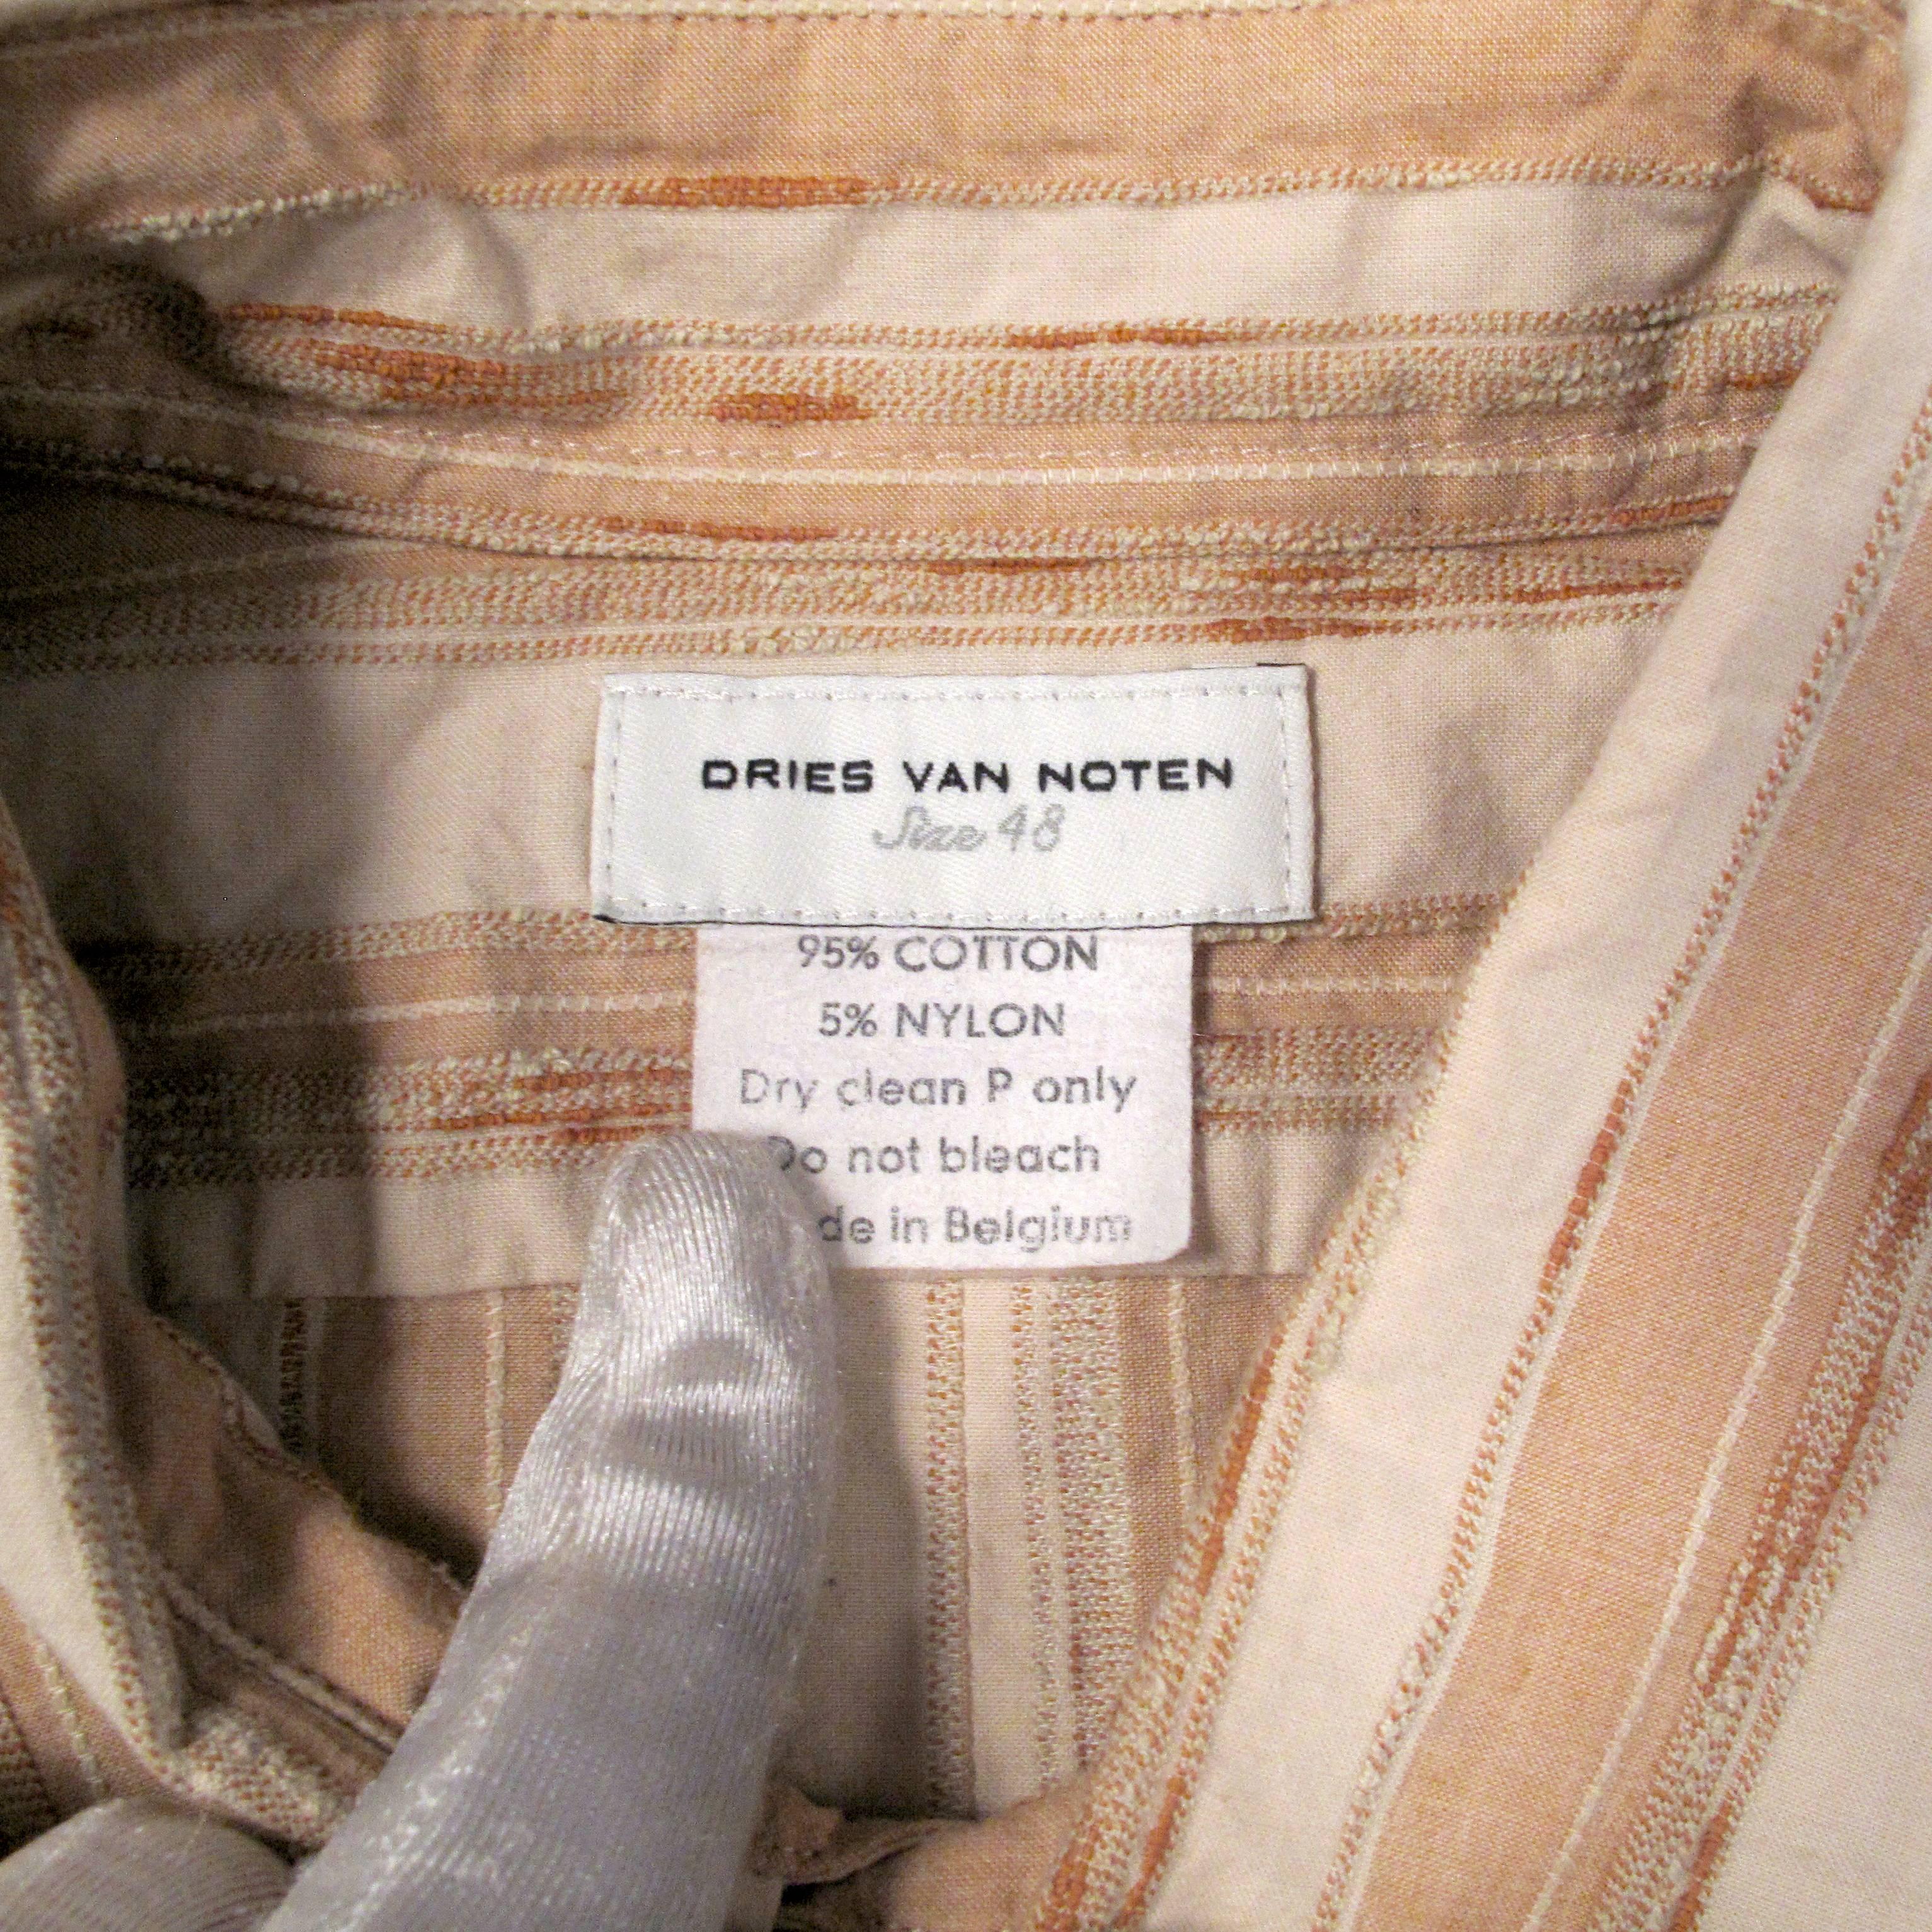 Beige Dries Van Noten Shirt - Small - 48  - Embroidered Striped Button Up Tan